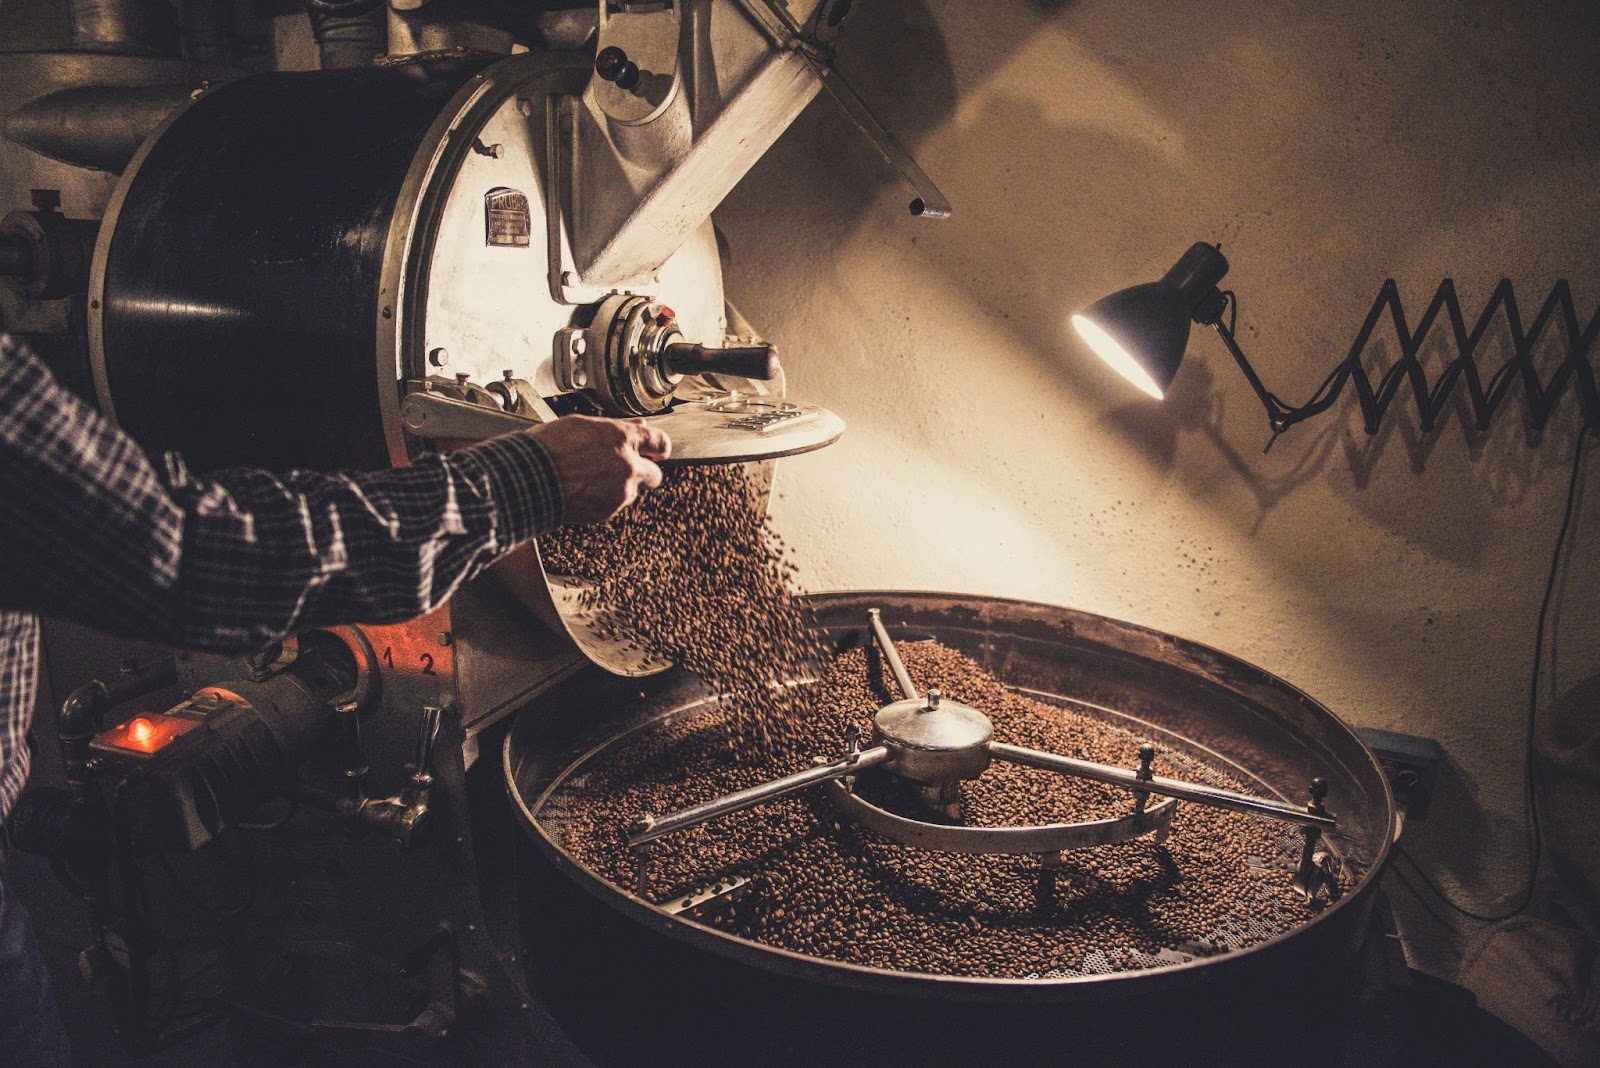 Coffee beans pouring into a roasting machine.